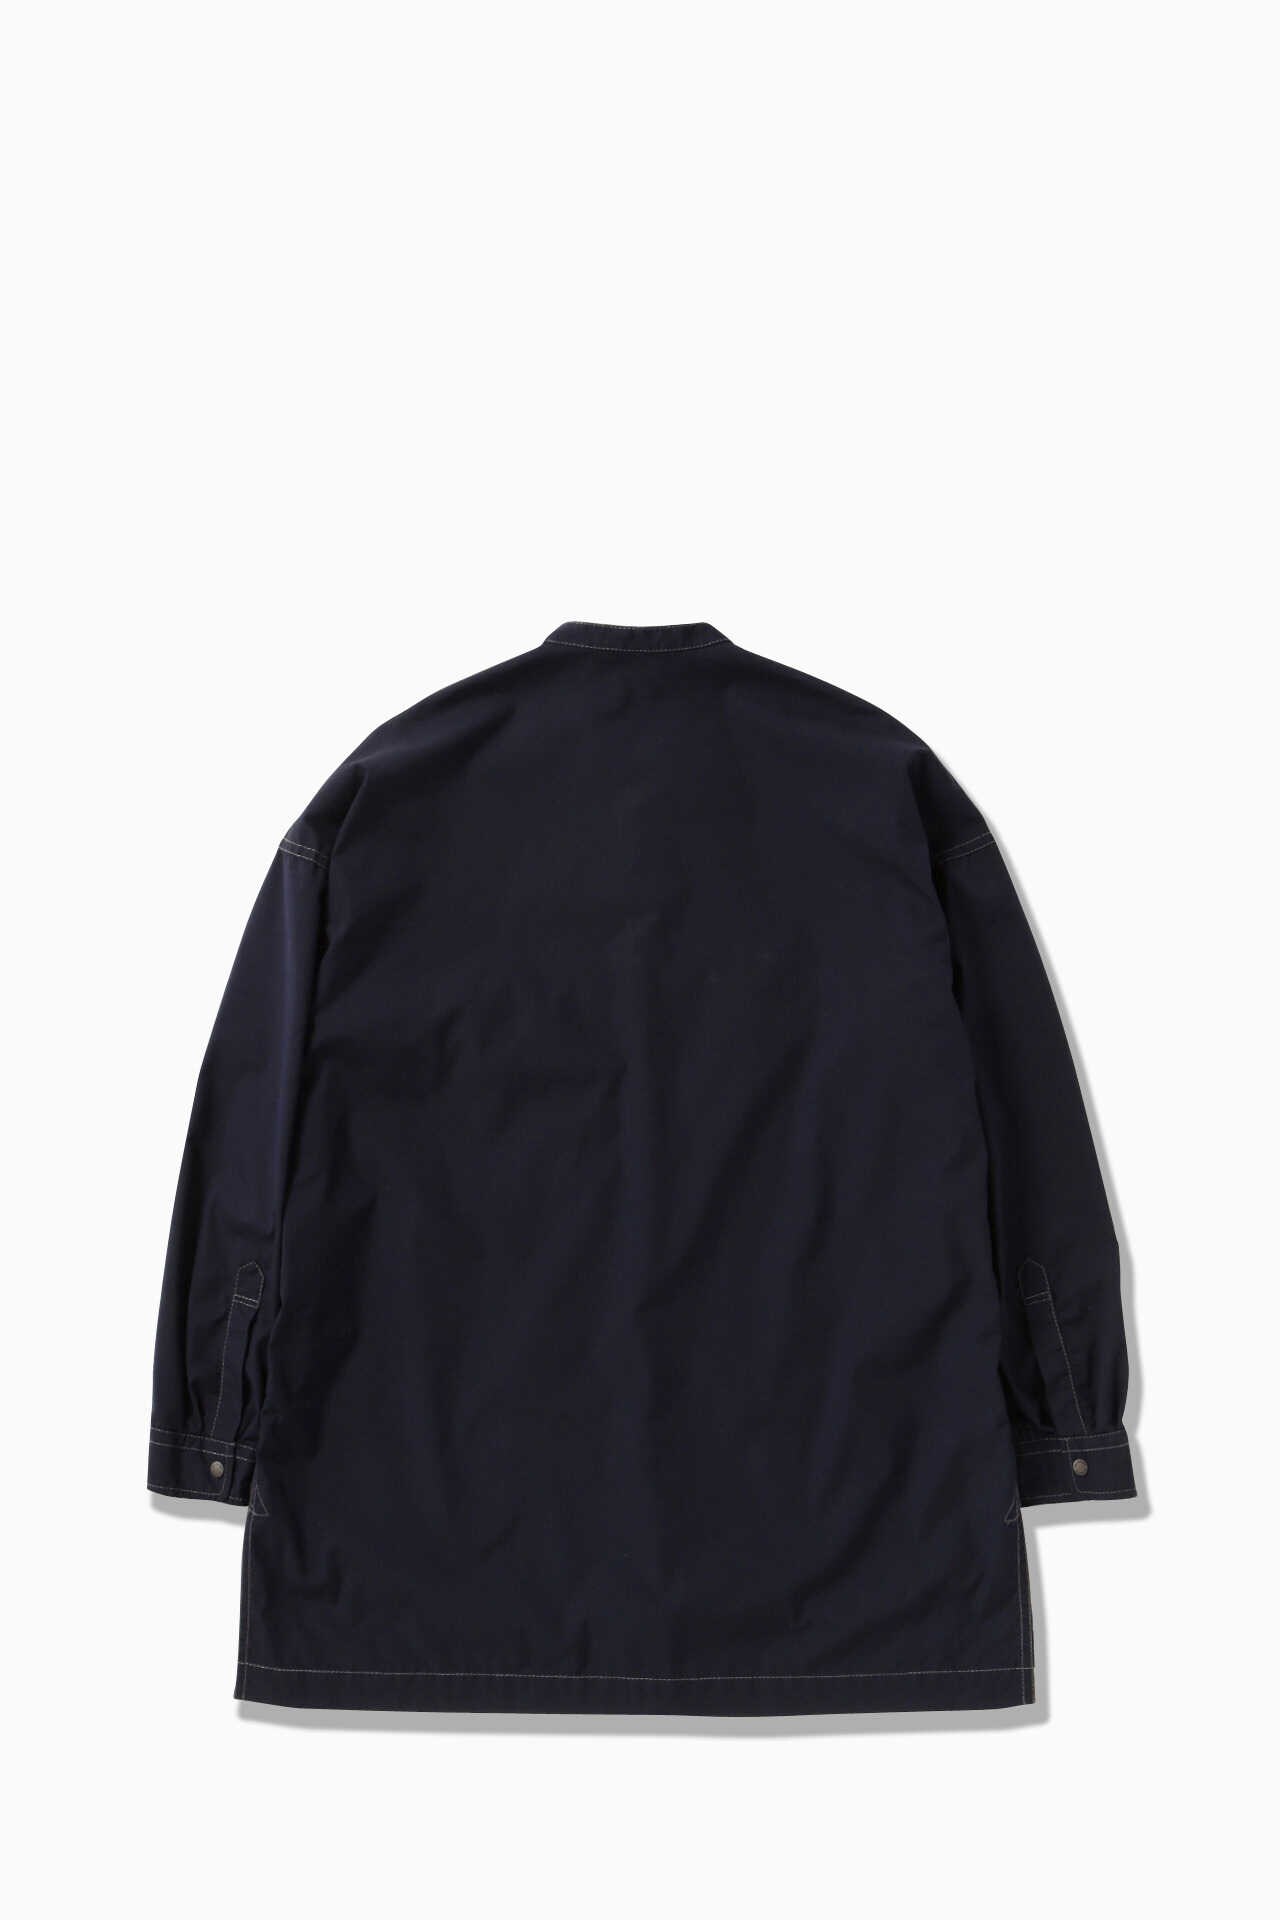 dry rip long pullover